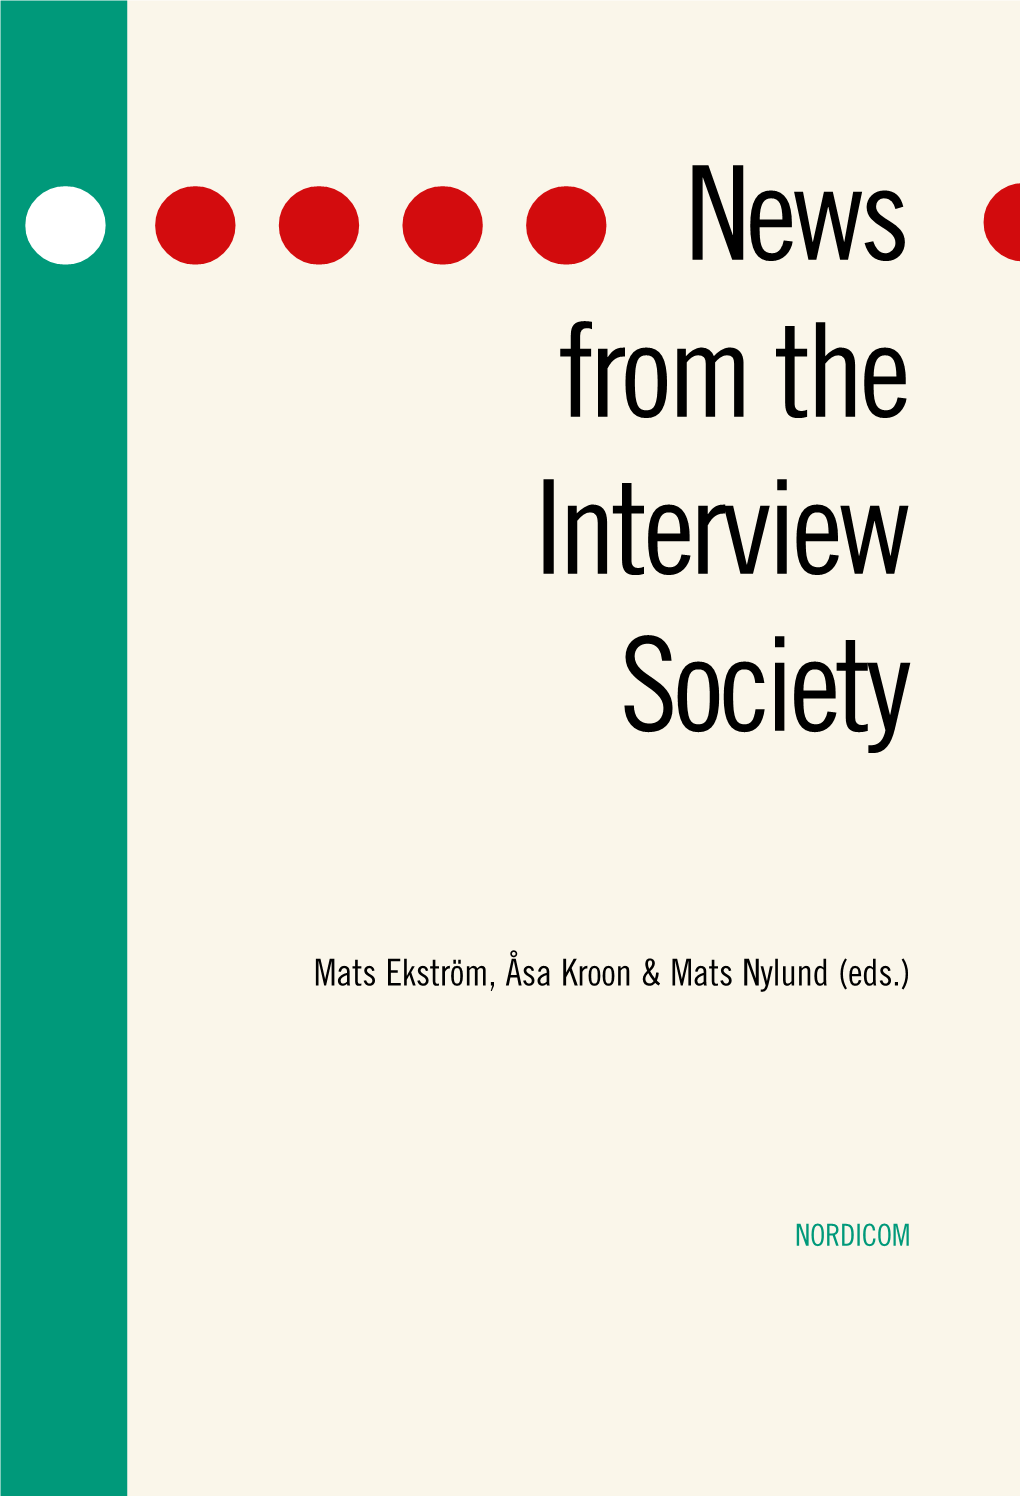 News from the Interview Society